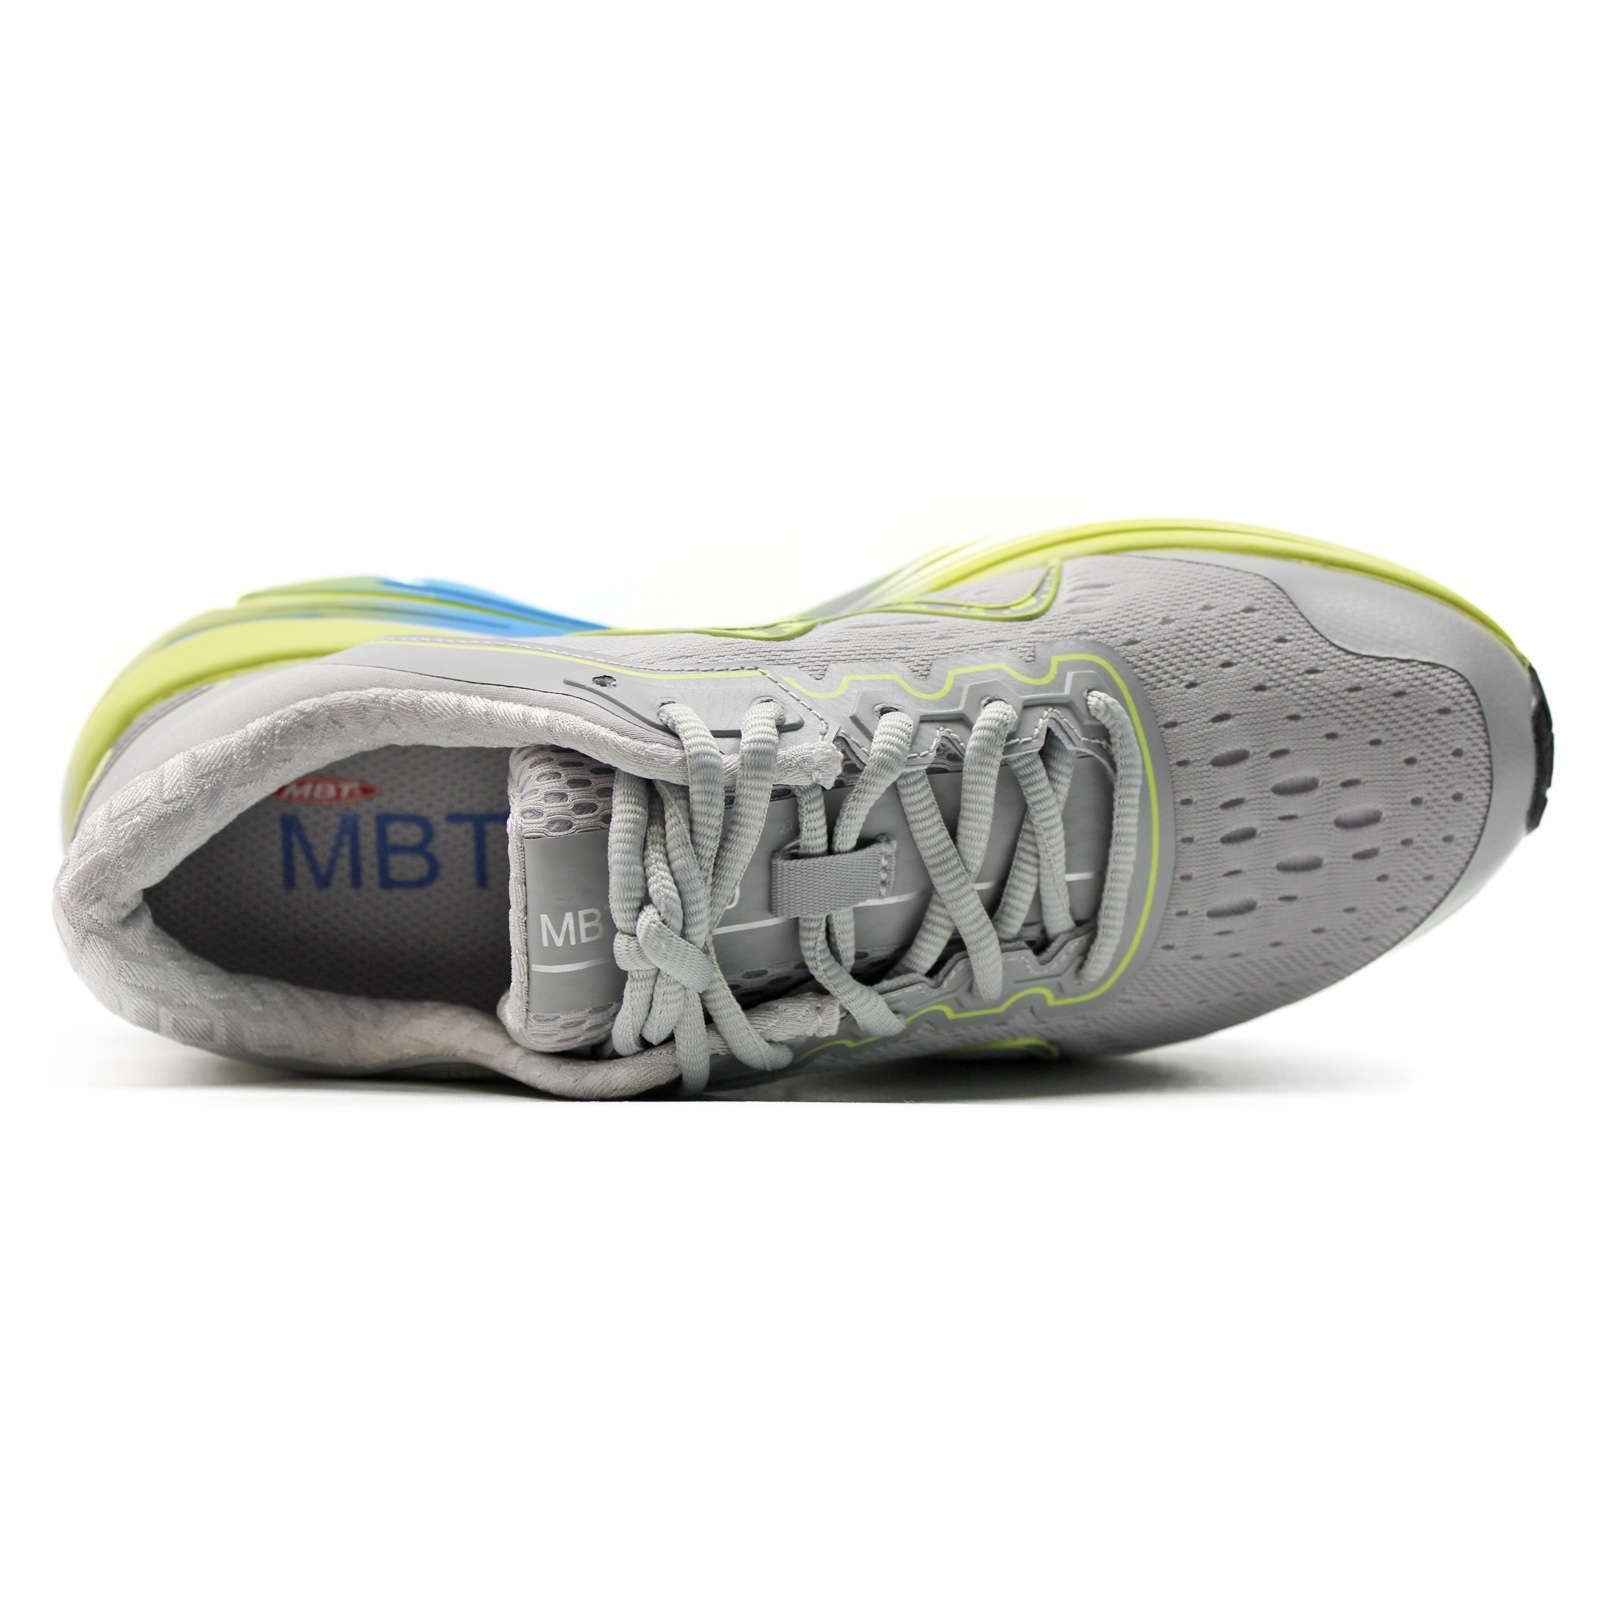 MBT GTC-2000 Mesh Women's Low-Top Sneakers#color_grey lime yellow